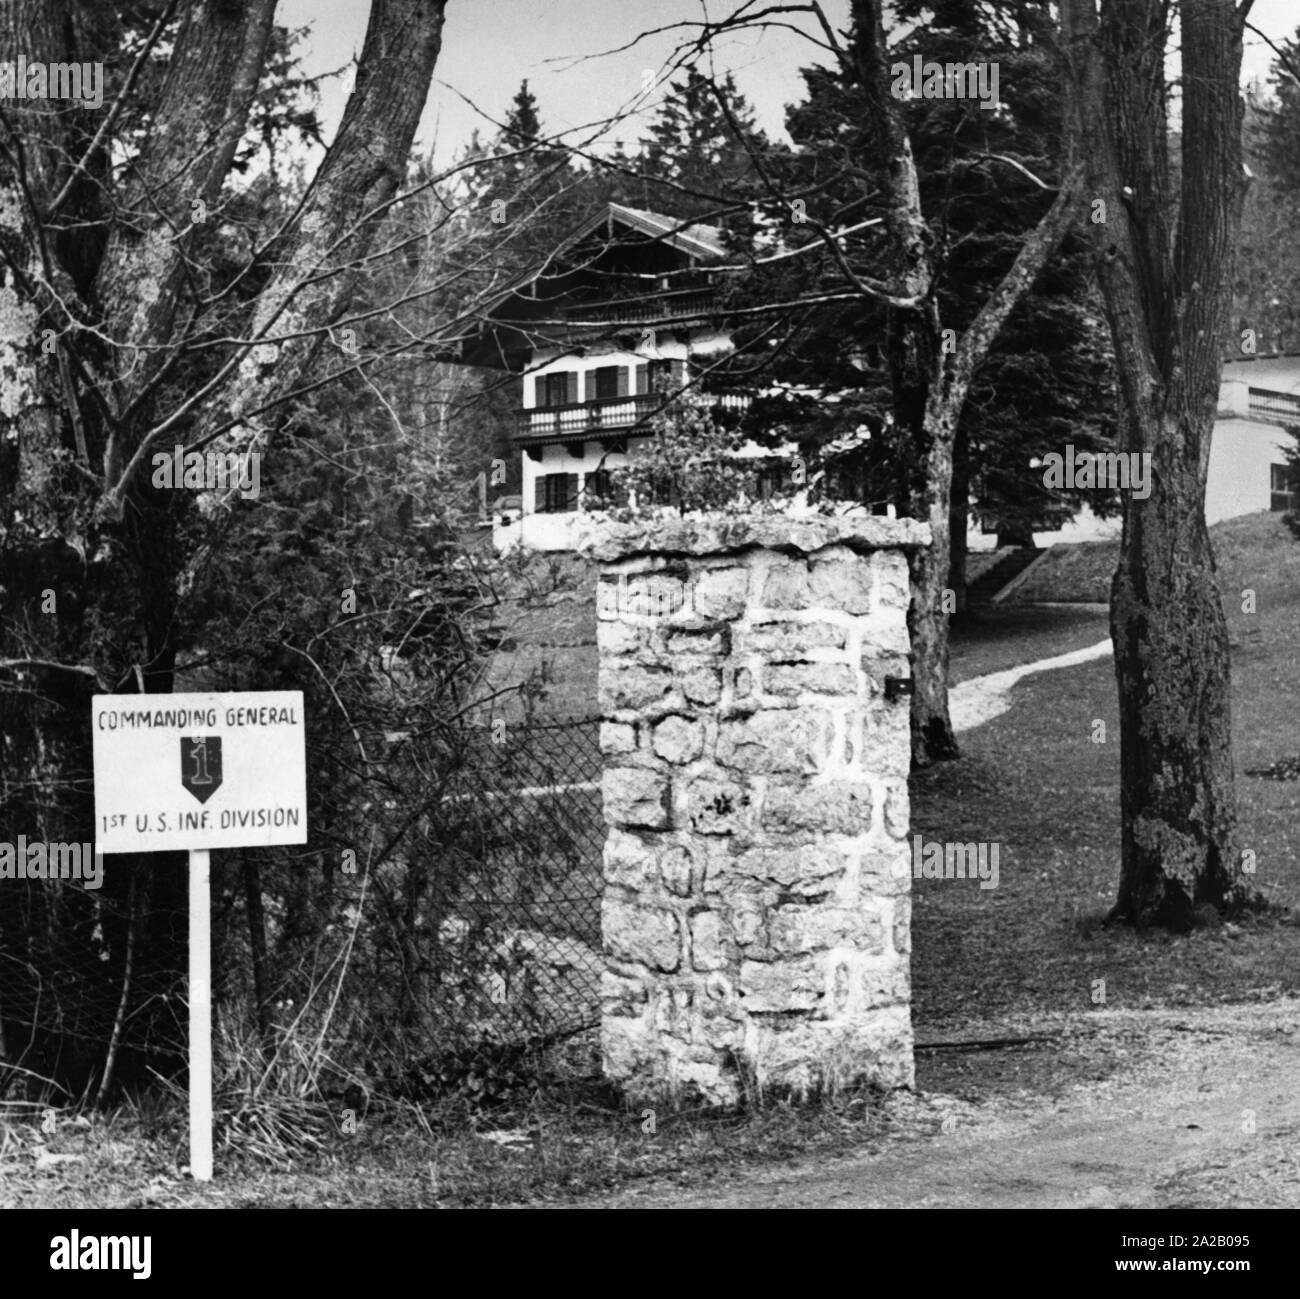 The house of Heinrich Himmler in Gmund am Tegernsee. On a sign in front of the house stands: 'Commanding General. 1st U.S. Inf. Division'. (undated photo) Stock Photo